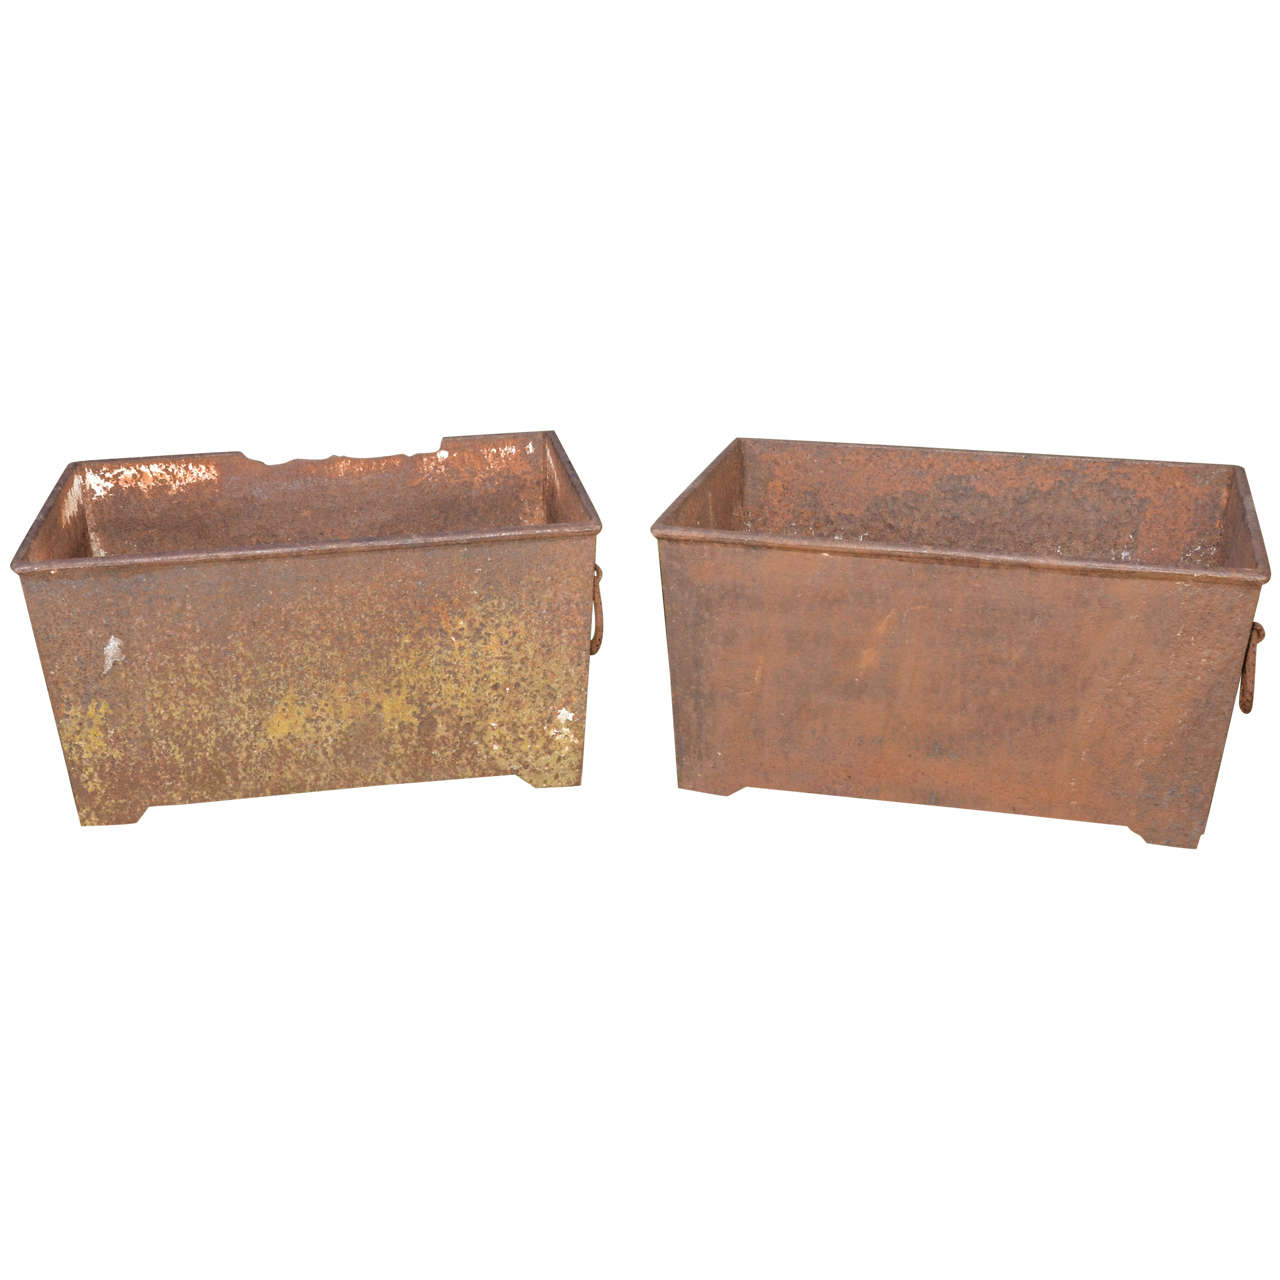 English 19Th Cent. Pair Of Rectangular Ring Handled Planters For Sale